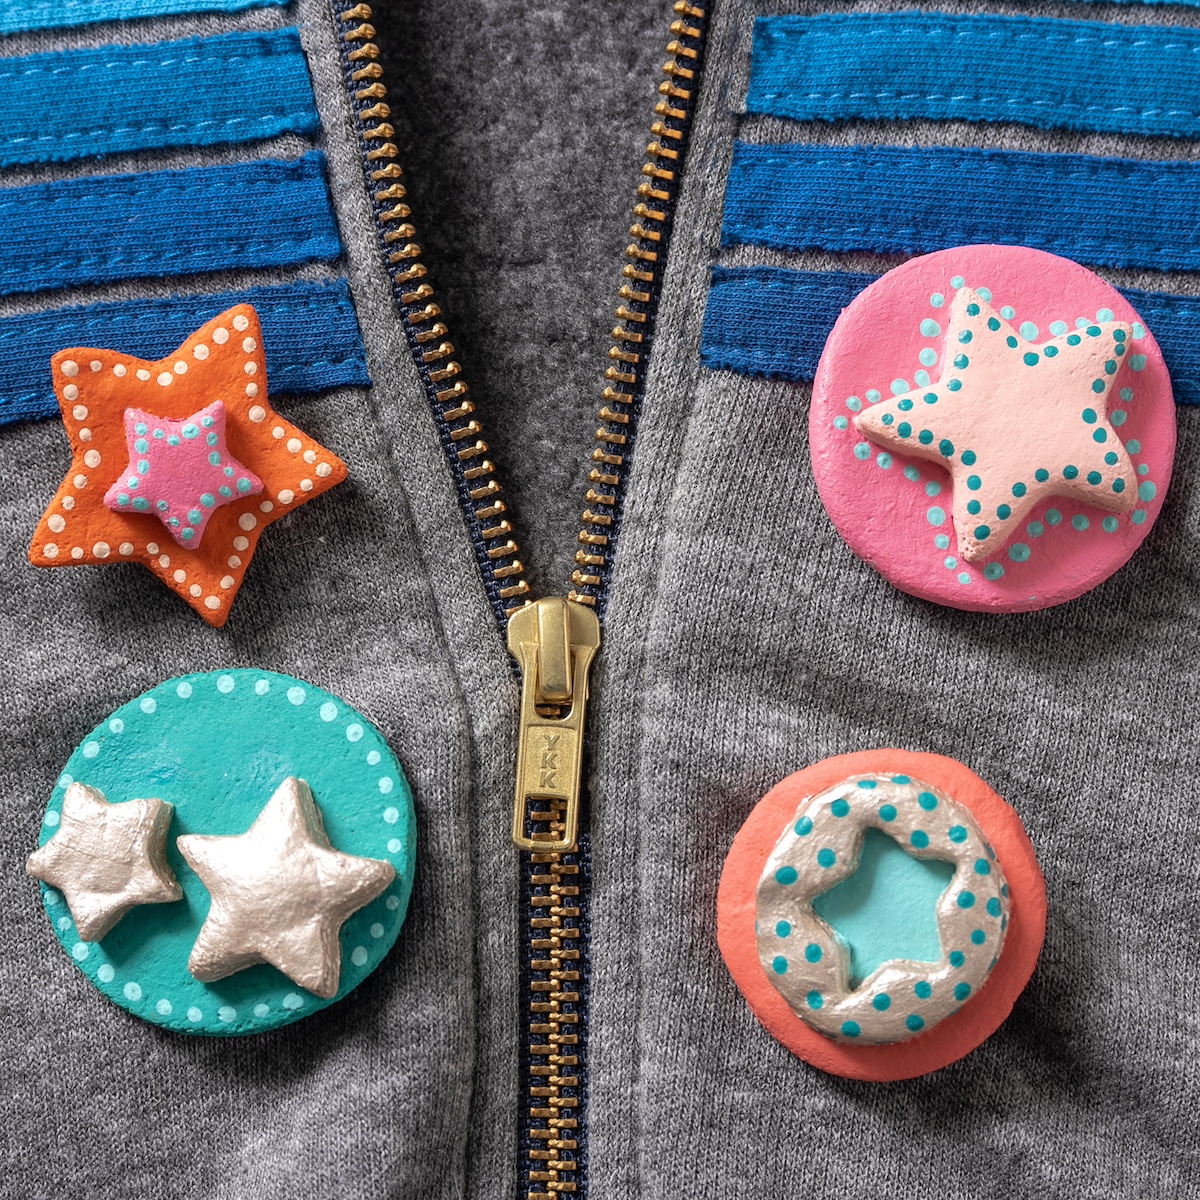 How to make pins with salt dough for kids